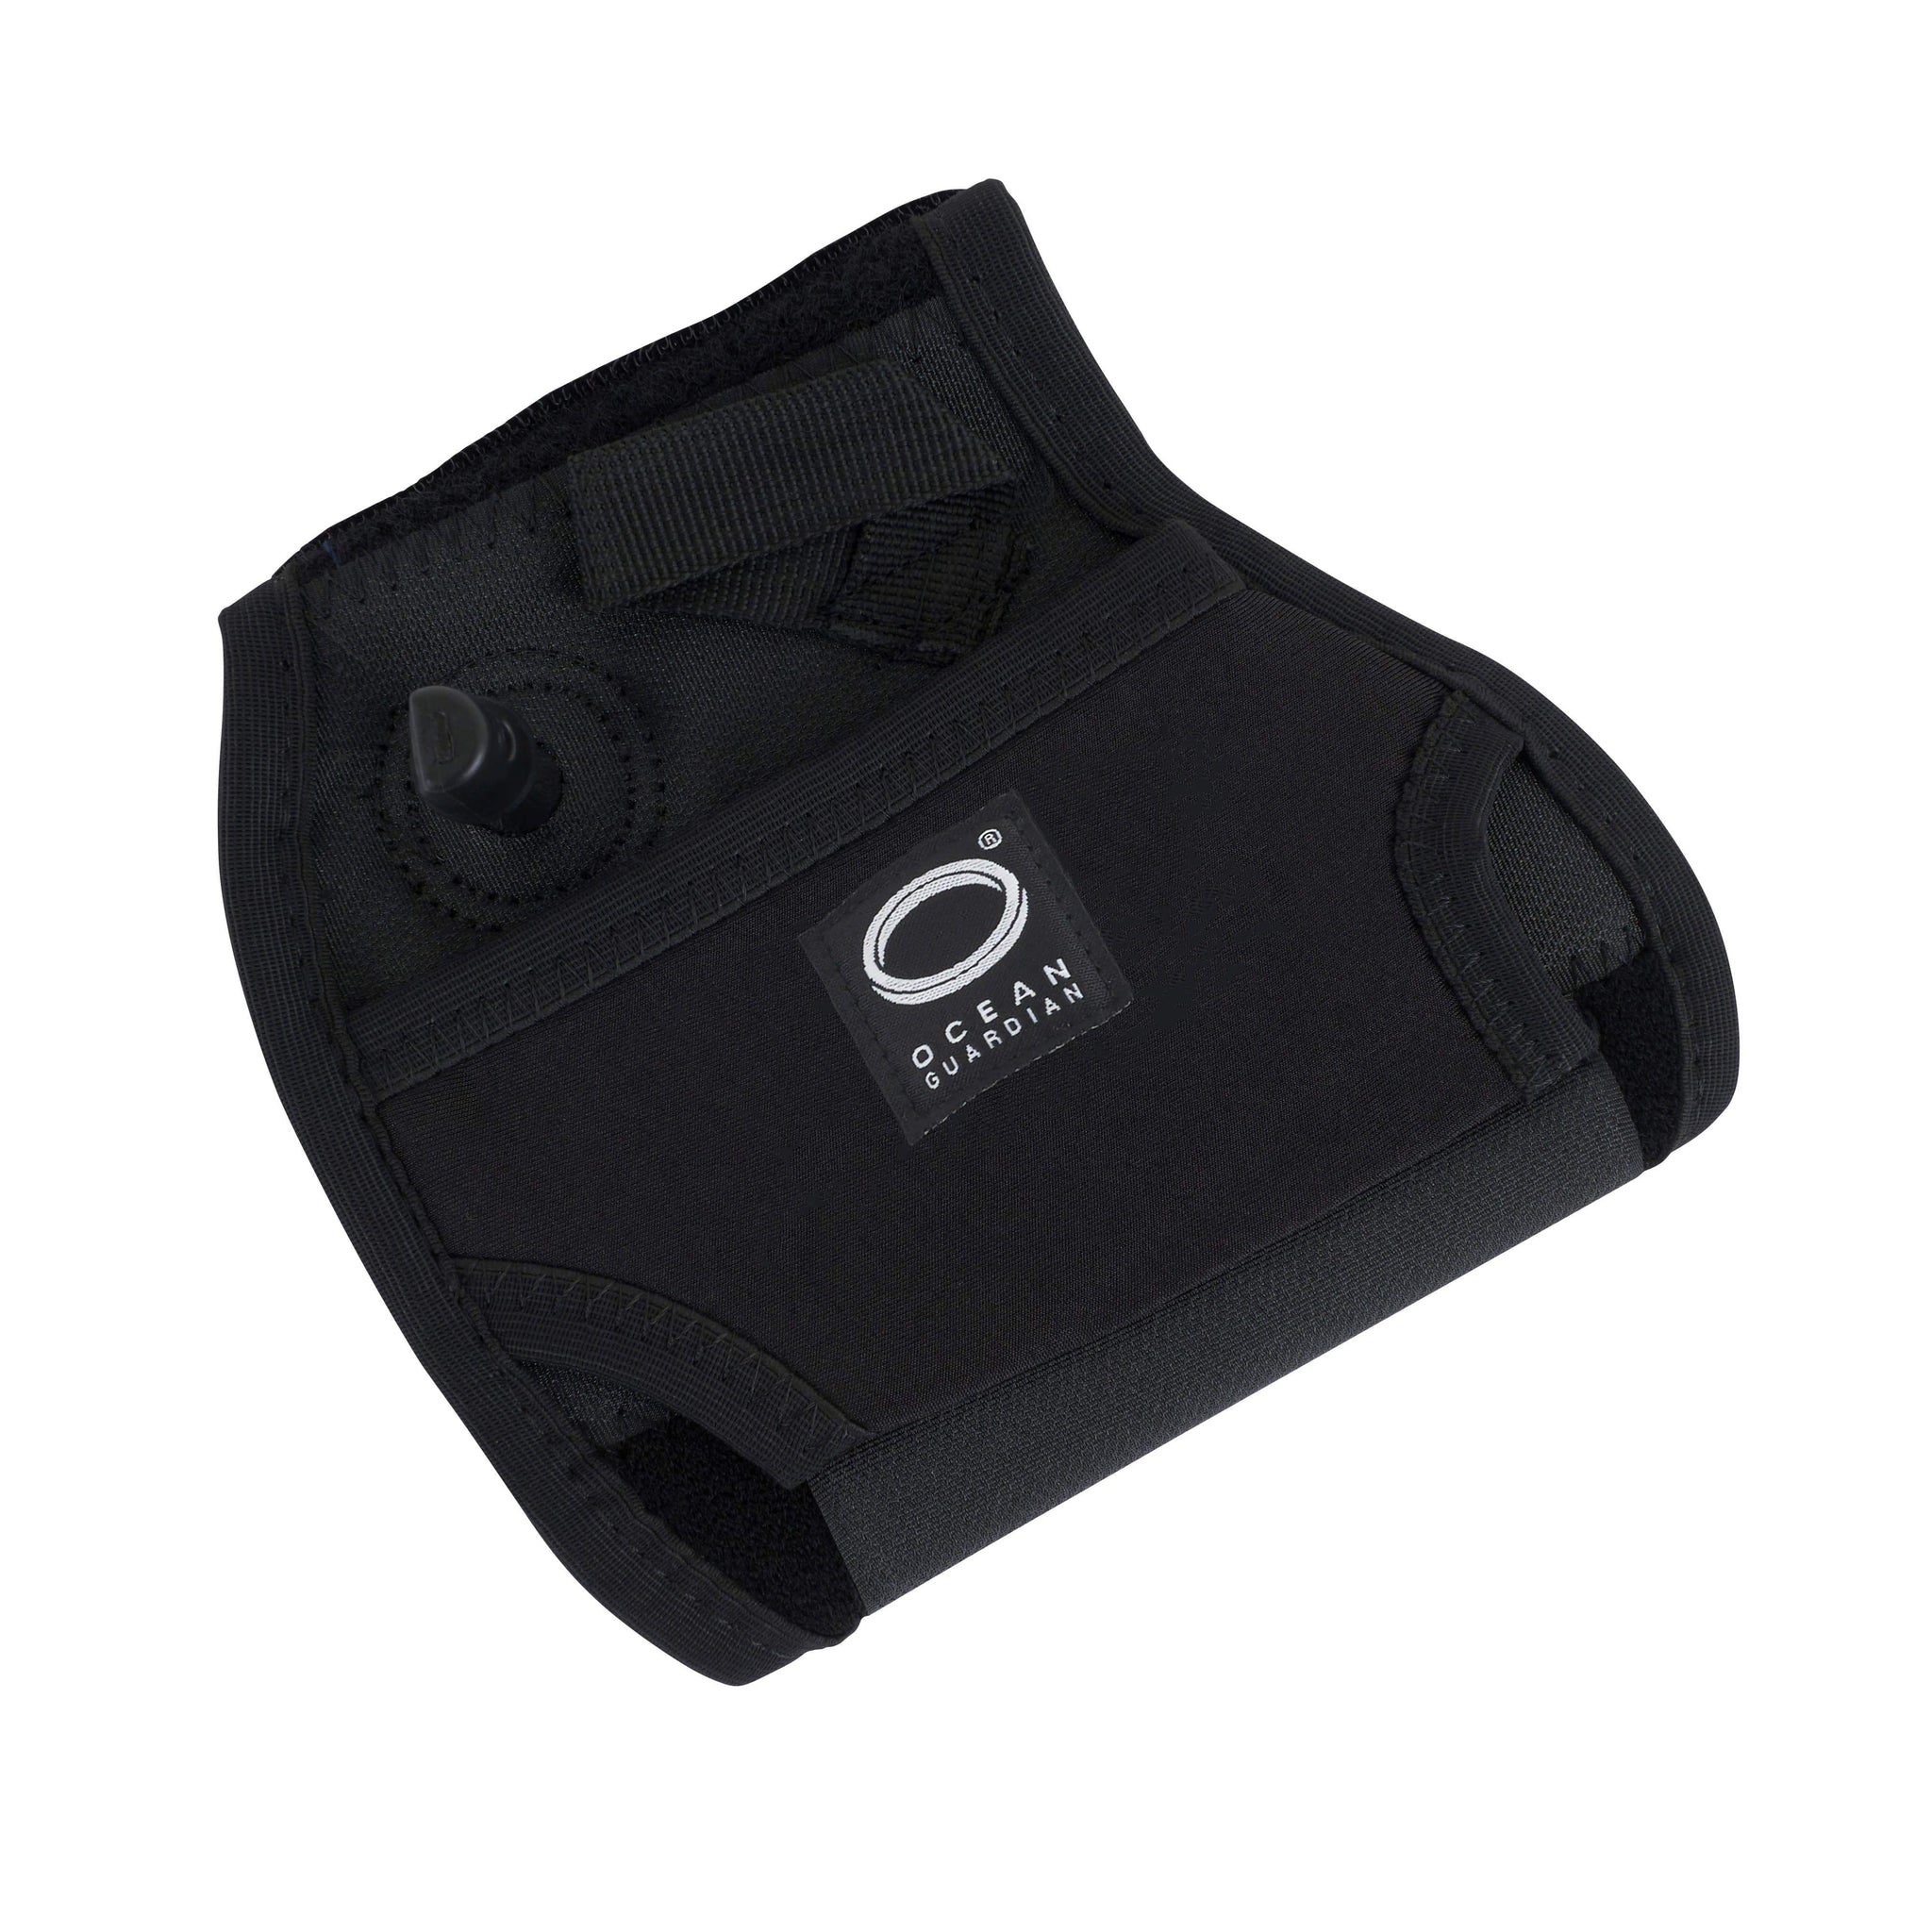 Shark Shield Freedom7 Replacement Pouch.